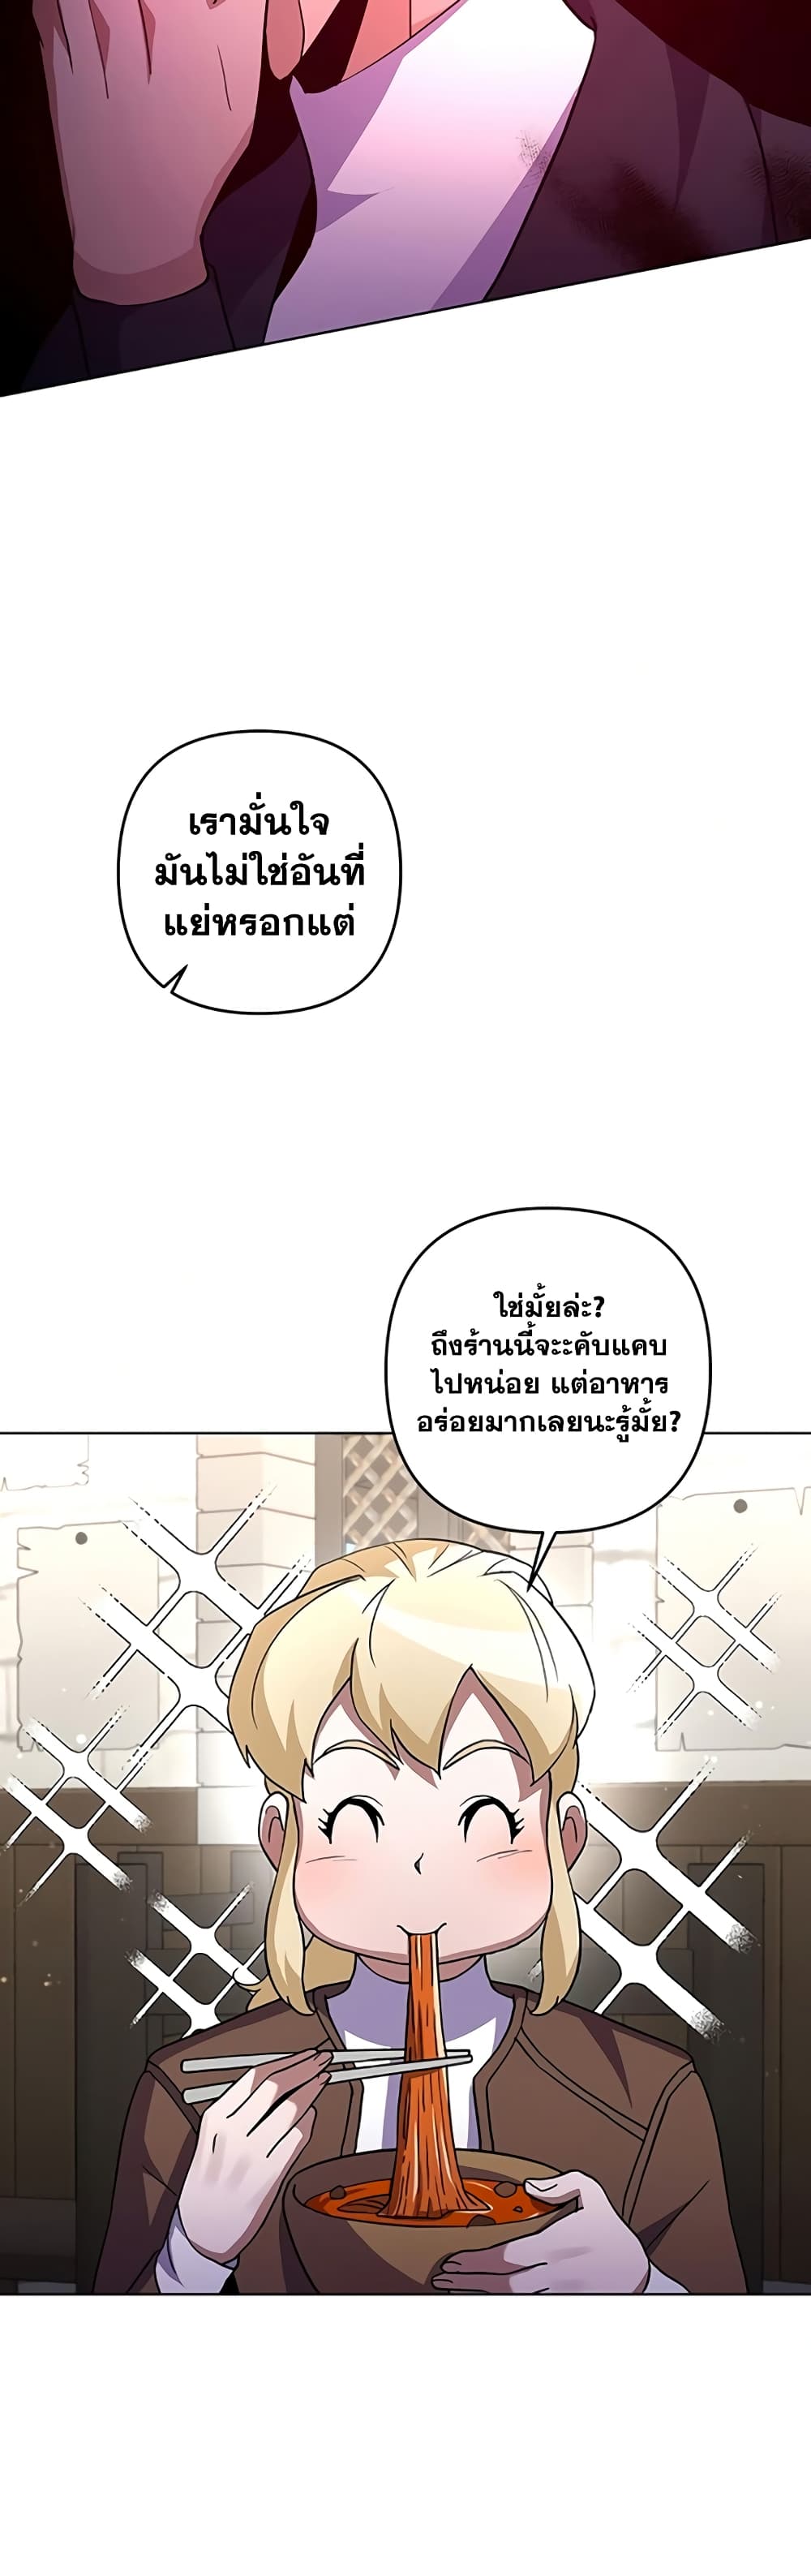 Surviving in an Action Manhwa 17-17